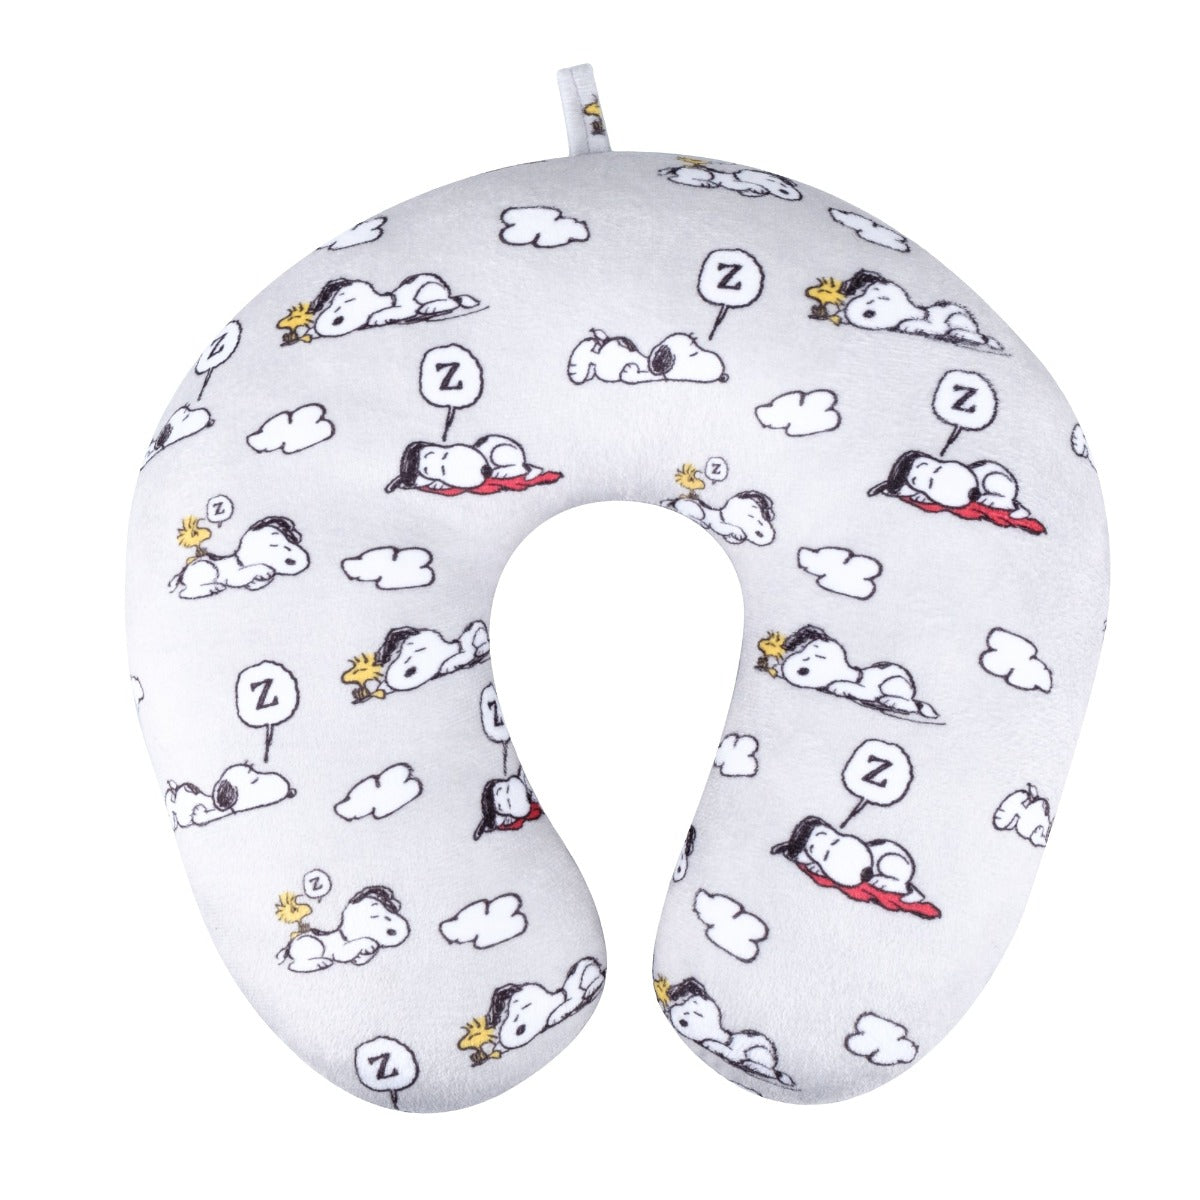 Peanuts Snoopy & Woodstock Clouds Travel Neck Pillow